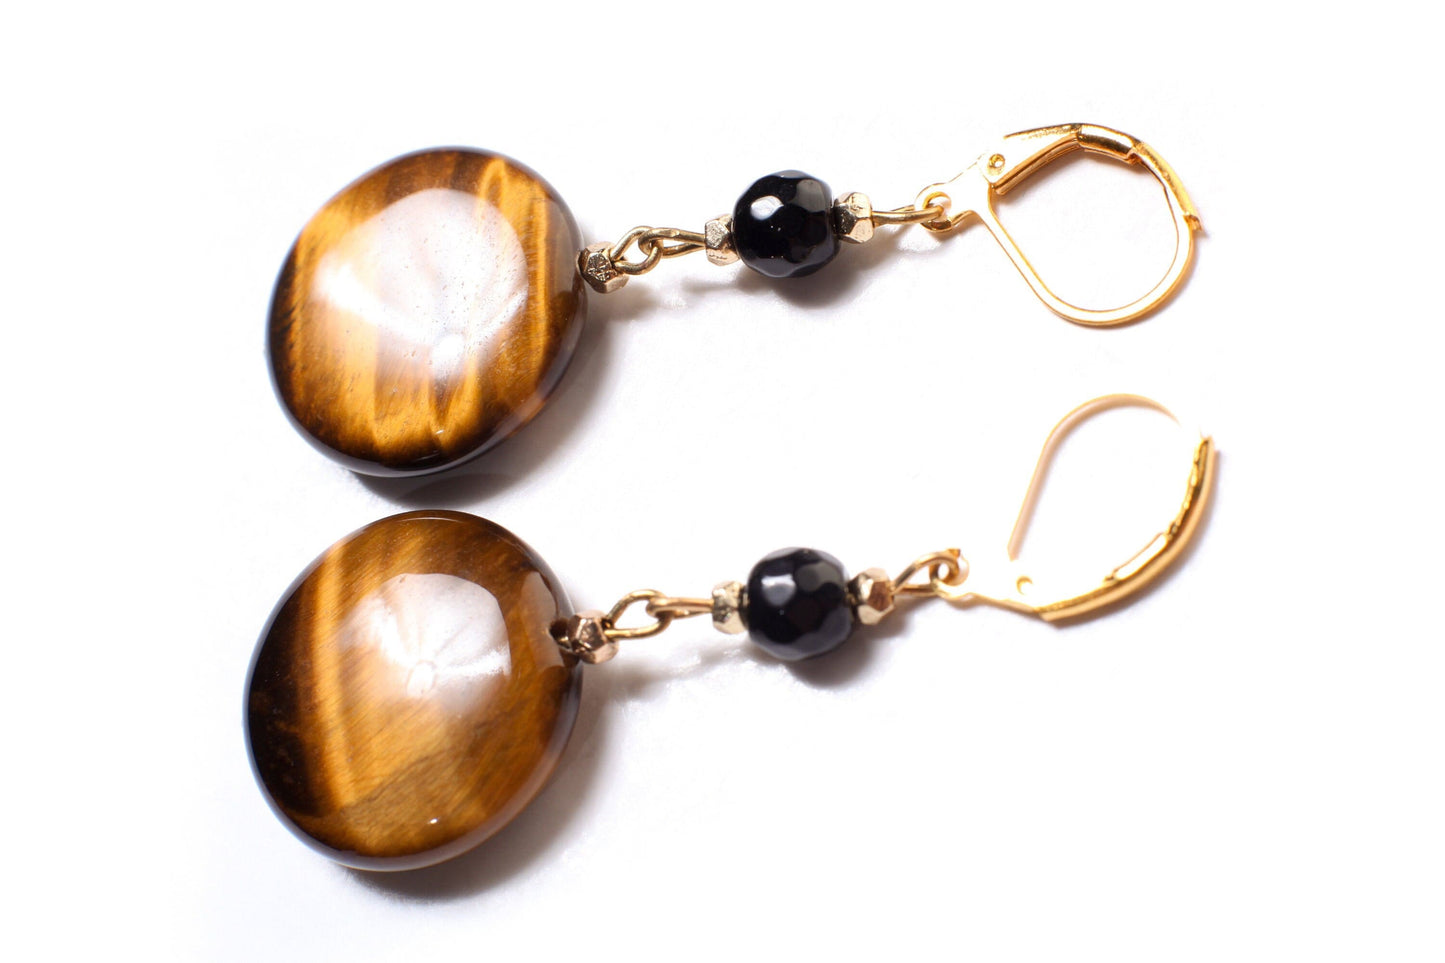 Tiger Eye Disk 20mm with Dangling Black Onyx Spacer Beads in Gold Leverback Earrings